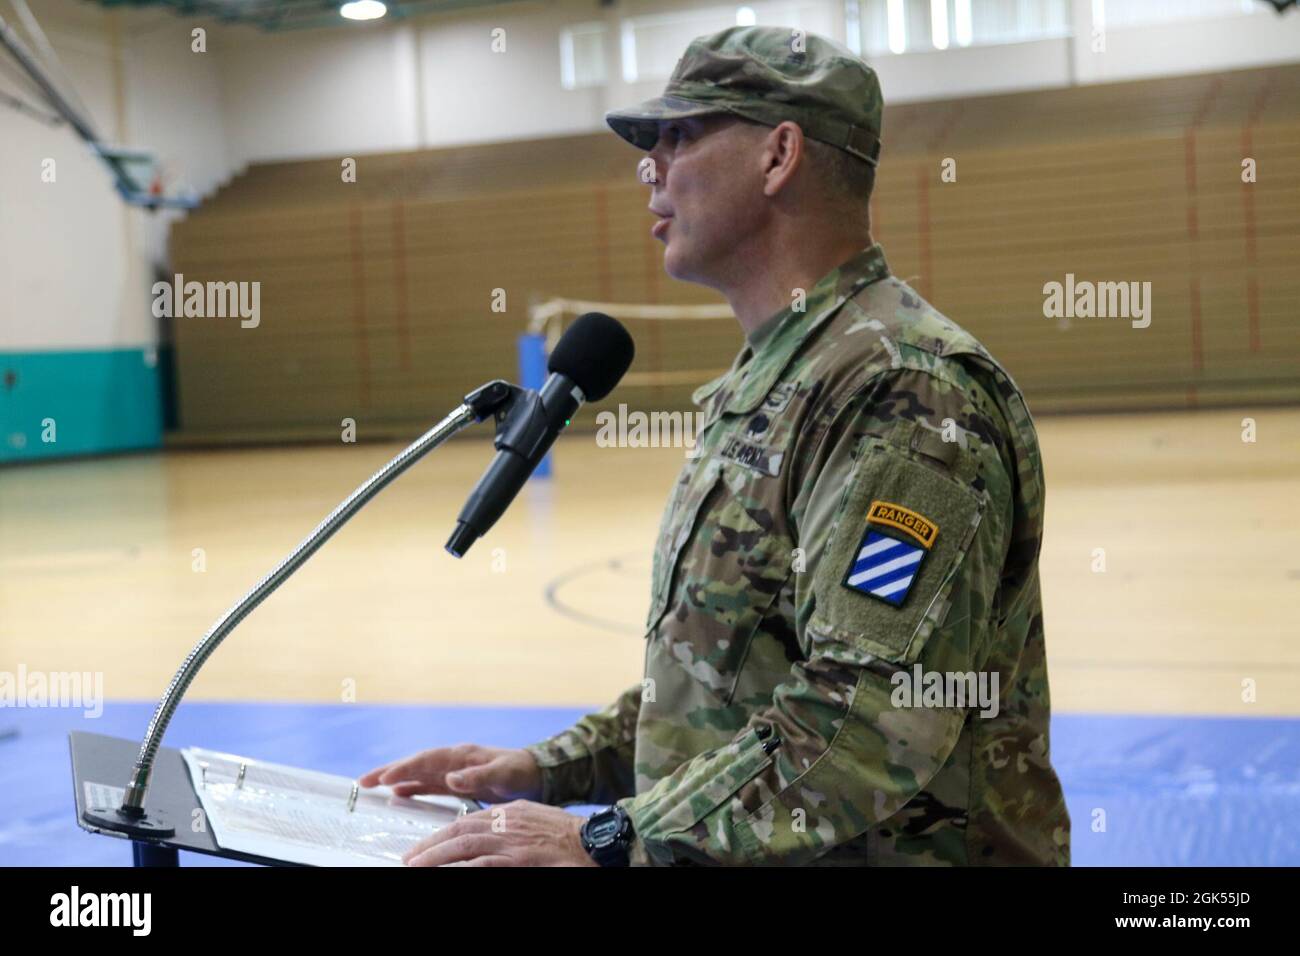 U.S. Army Col. Trent D. Upton, commander of 1st Armored Brigade Combat Team, 3rd Infantry Division, speaks during a change of command ceremony, August 4, 2021, at Fort Stewart, Georgia.  The ceremony formally transfers command of 10th Engineer Battalion, 1ABCT, 3ID, from Lt. Col. Sean A. Wittmeier to Lt. Col. Alexander D. Samms. Stock Photo